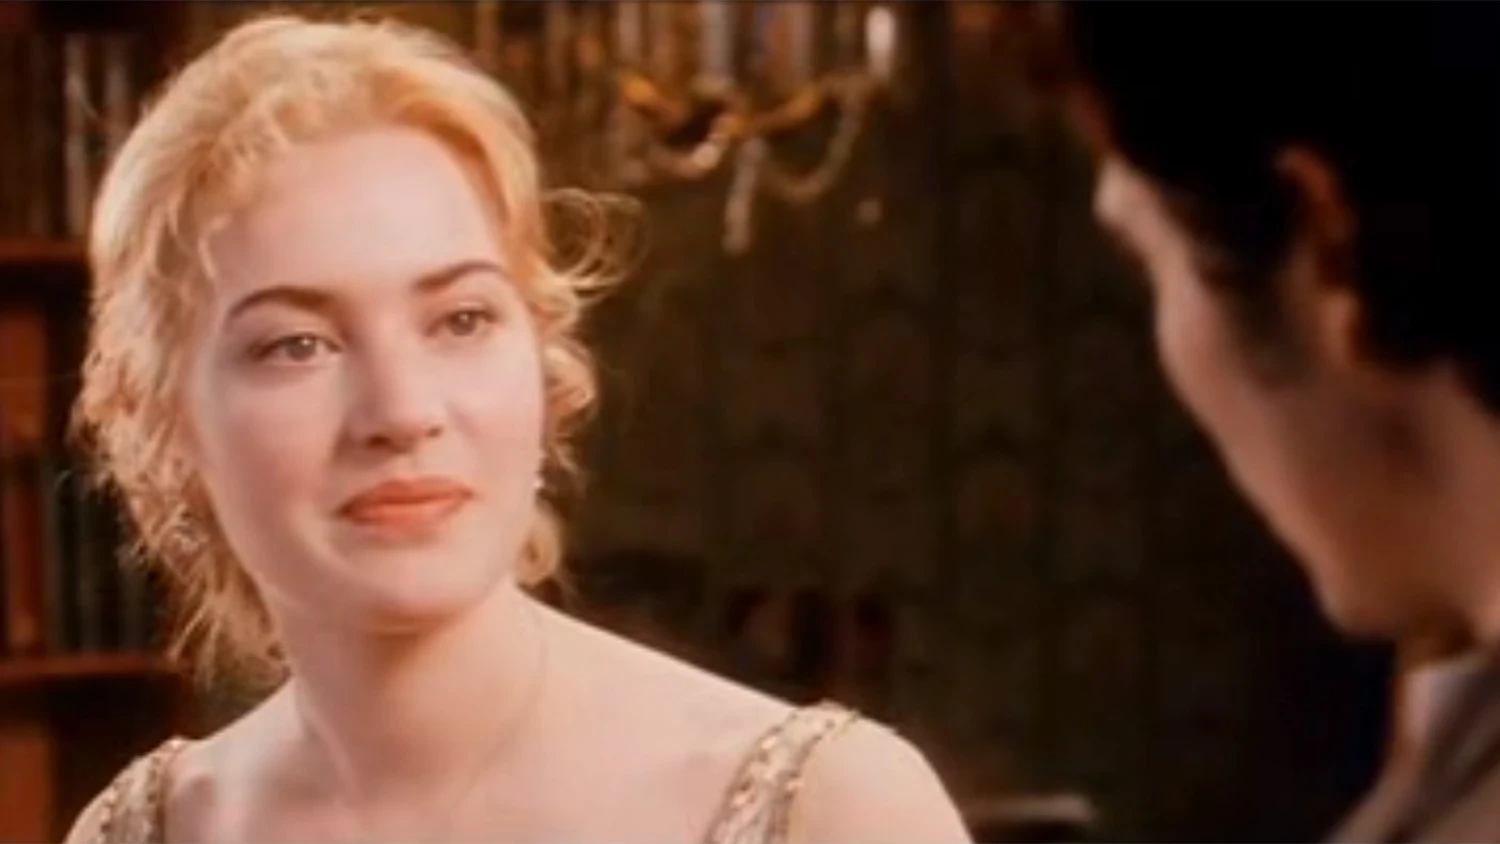 Kate Winslet's screen test for Titanic